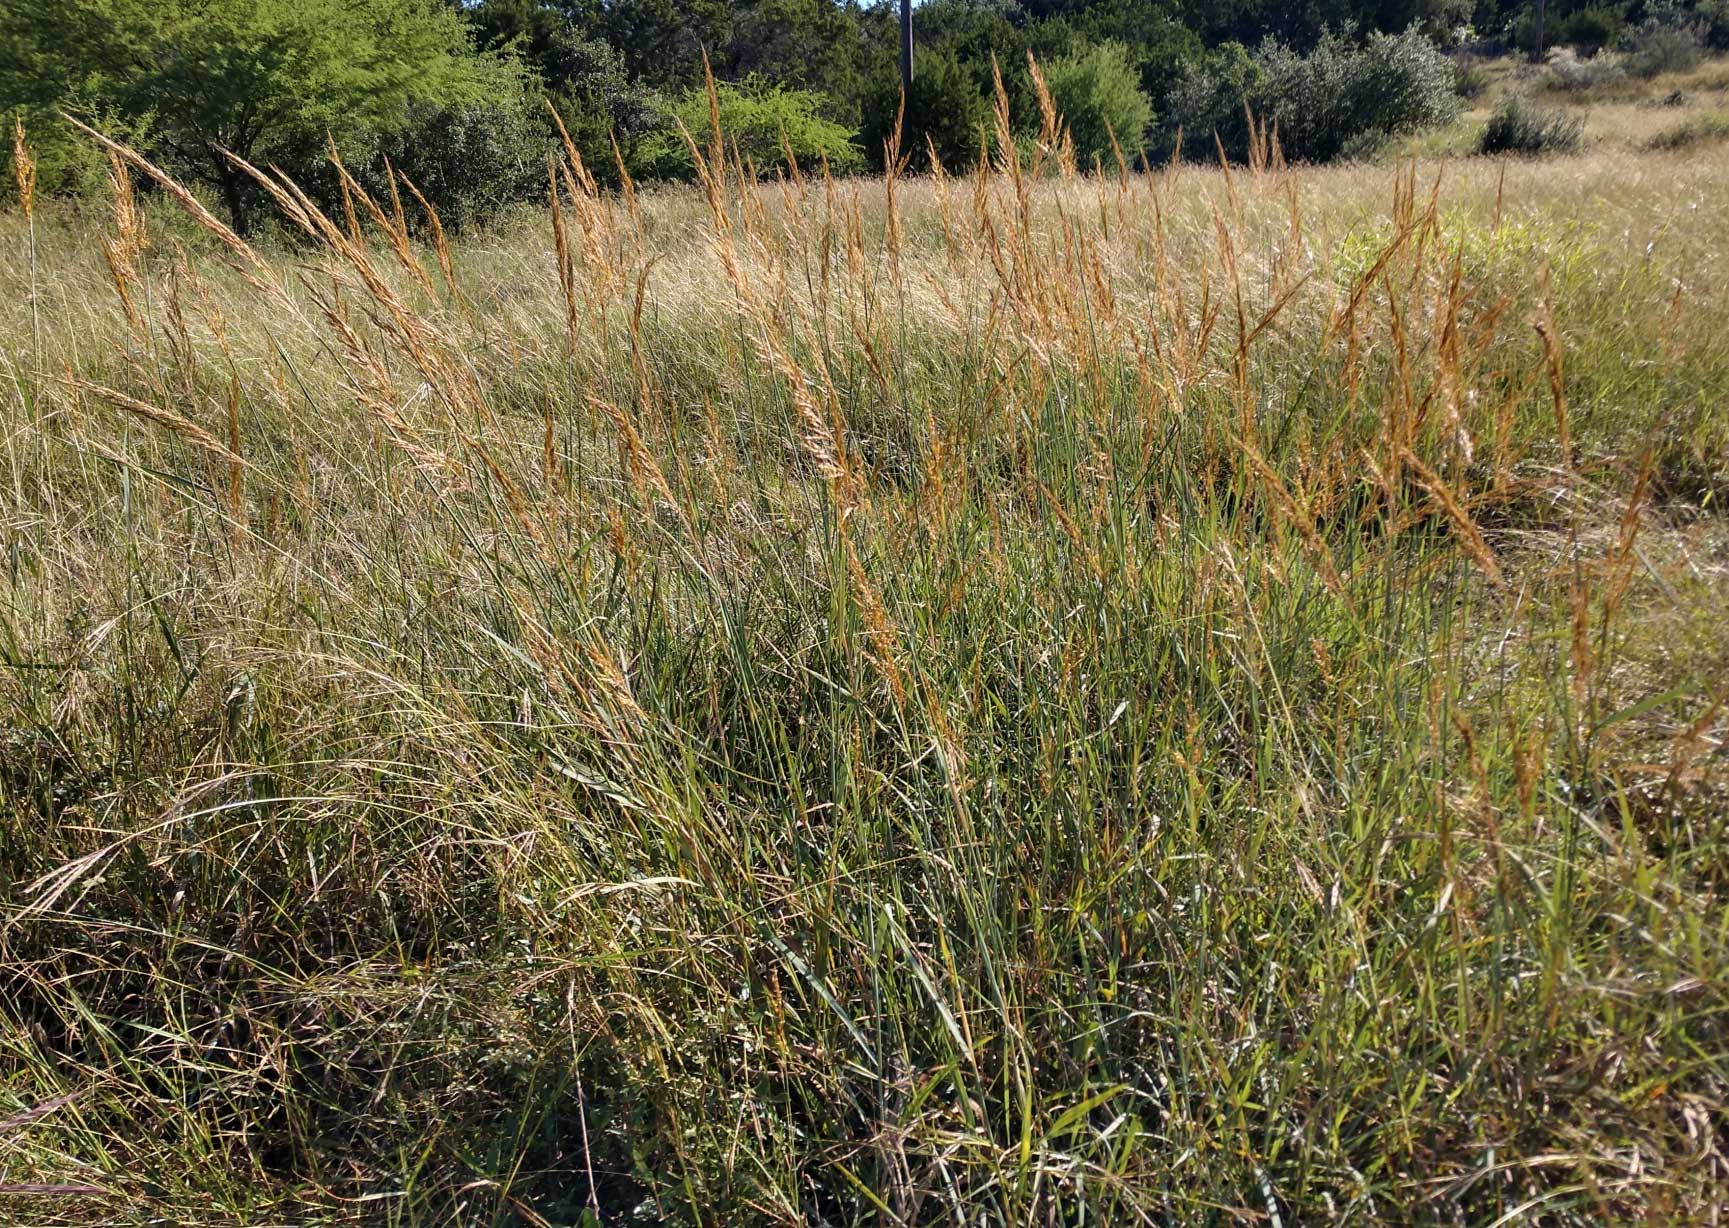 Photograph of Indiangrass. The photo shows long grass with feathery yellow inflorescences growing in an open field.